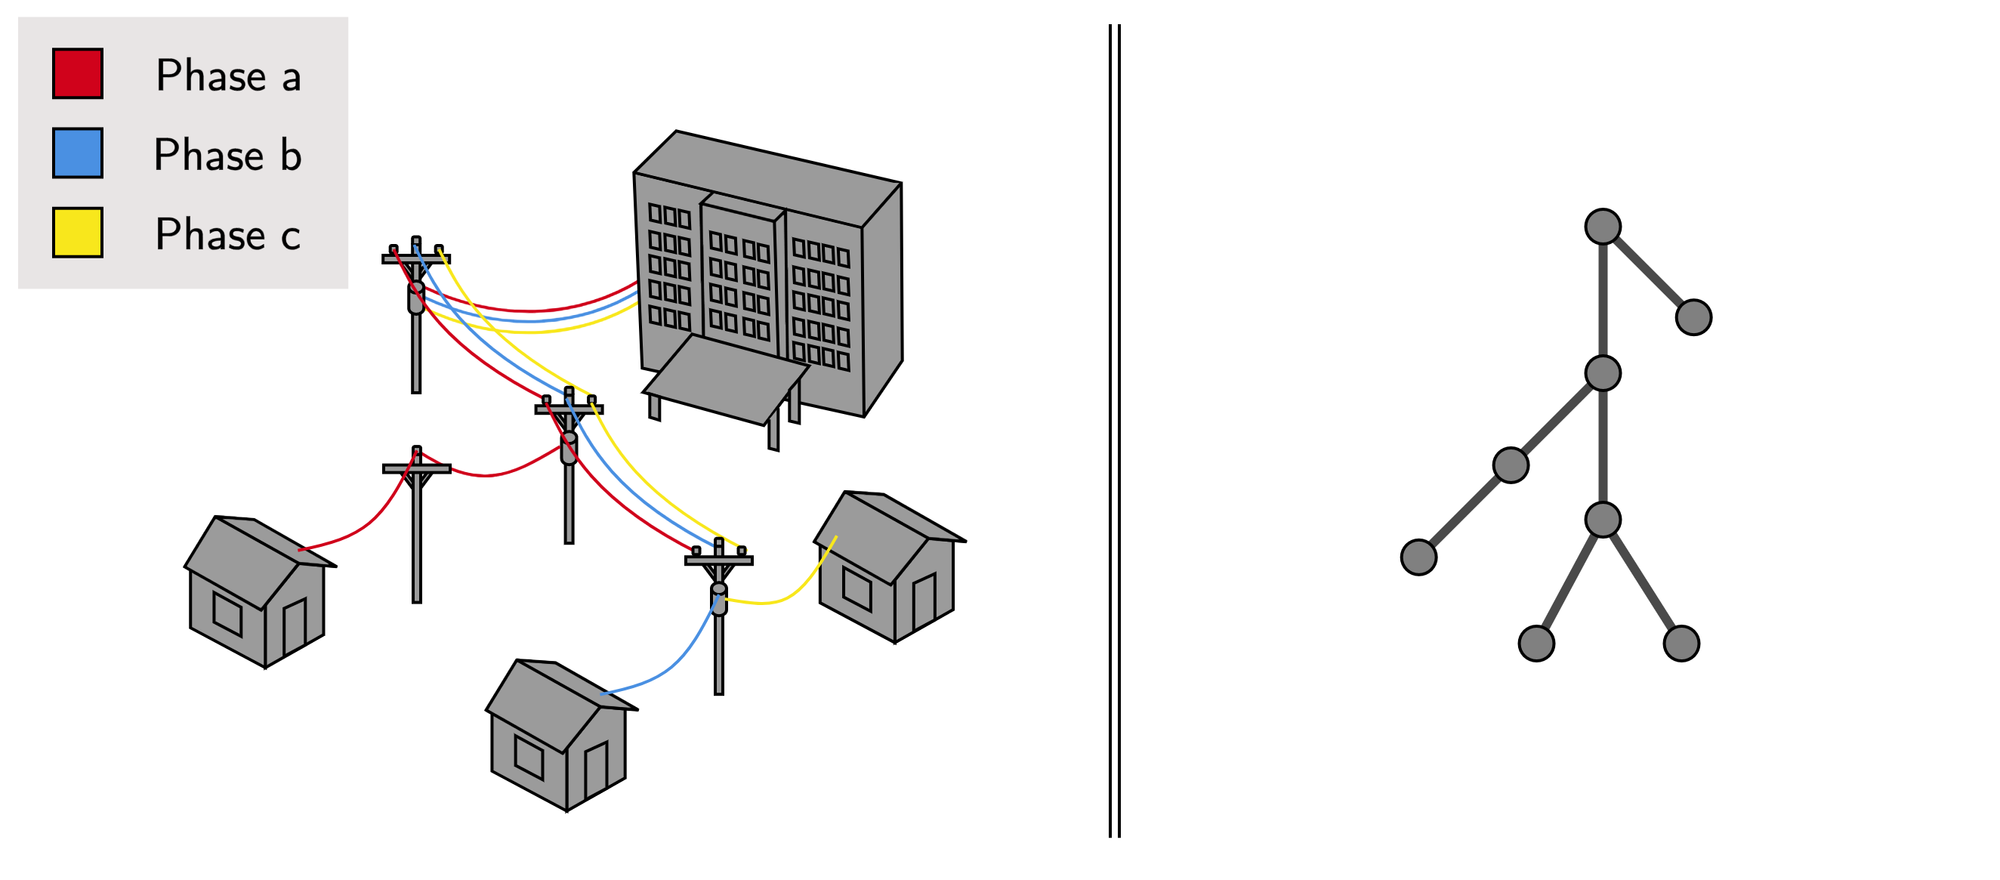 Figure 1. Visualizing grid topologies. (Left) The full topology includes specification of which phase(s) connect two points in the grid. (Right) We often simplify topology into a single-line diagram, disregarding phase information, and much other detail.